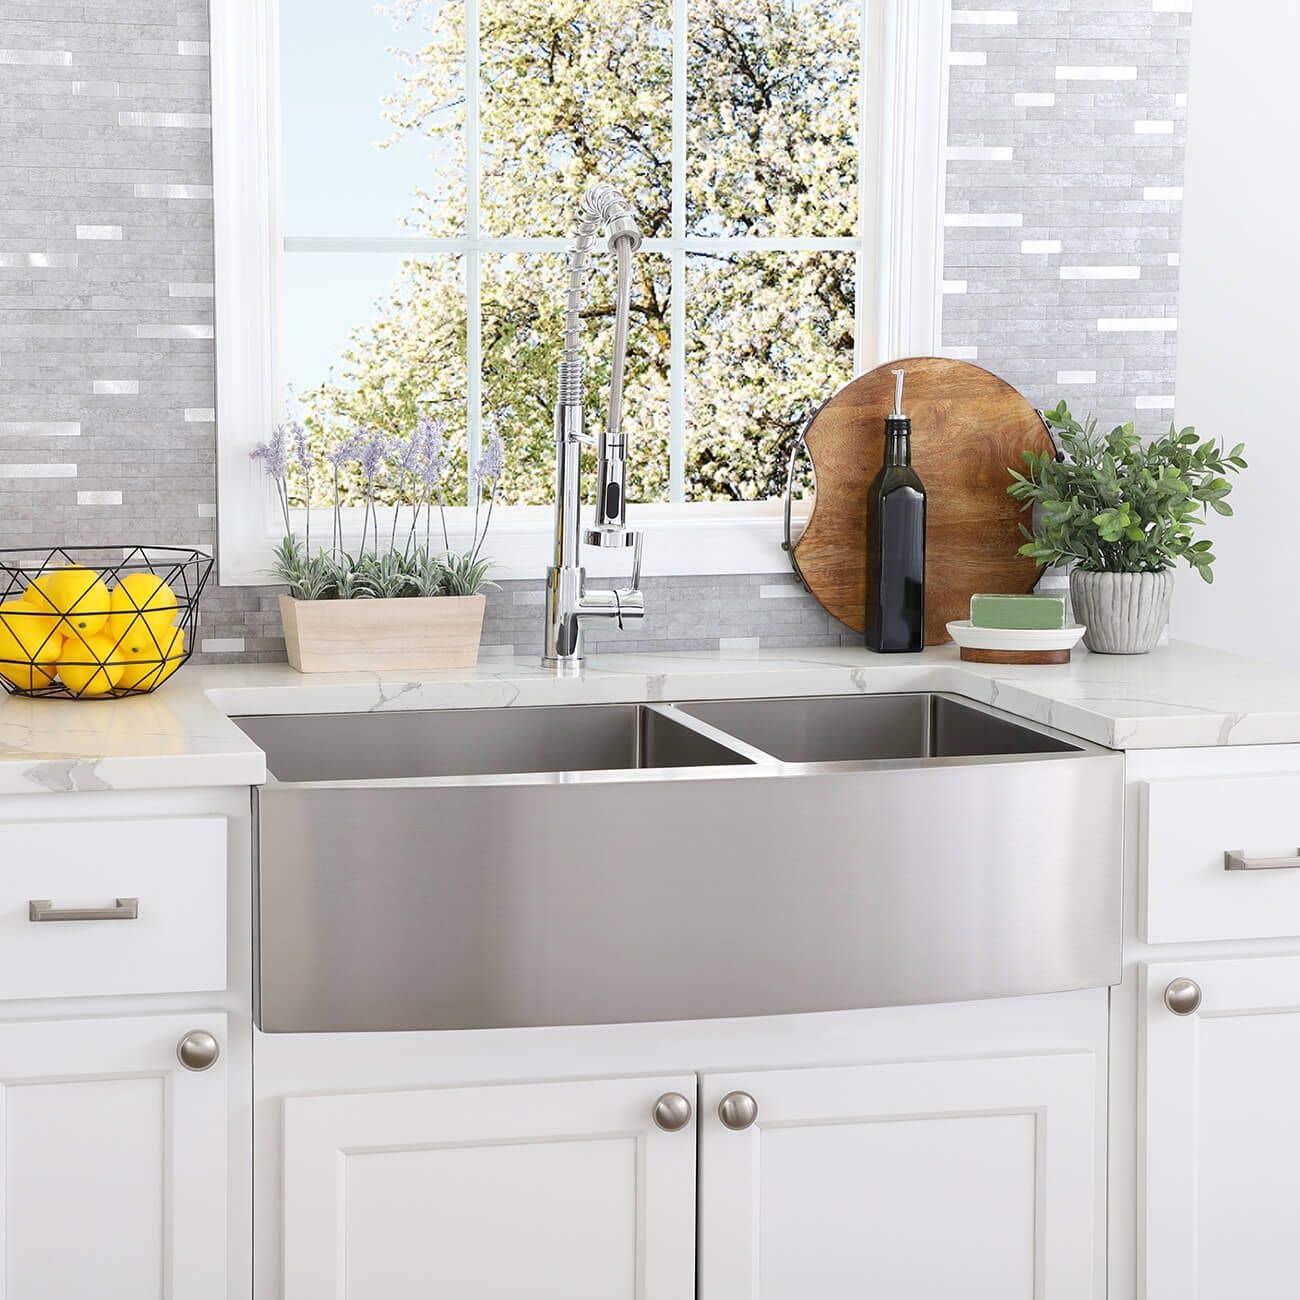 Stainless Steel 33 Bowl Apron Front Kitchen Sink